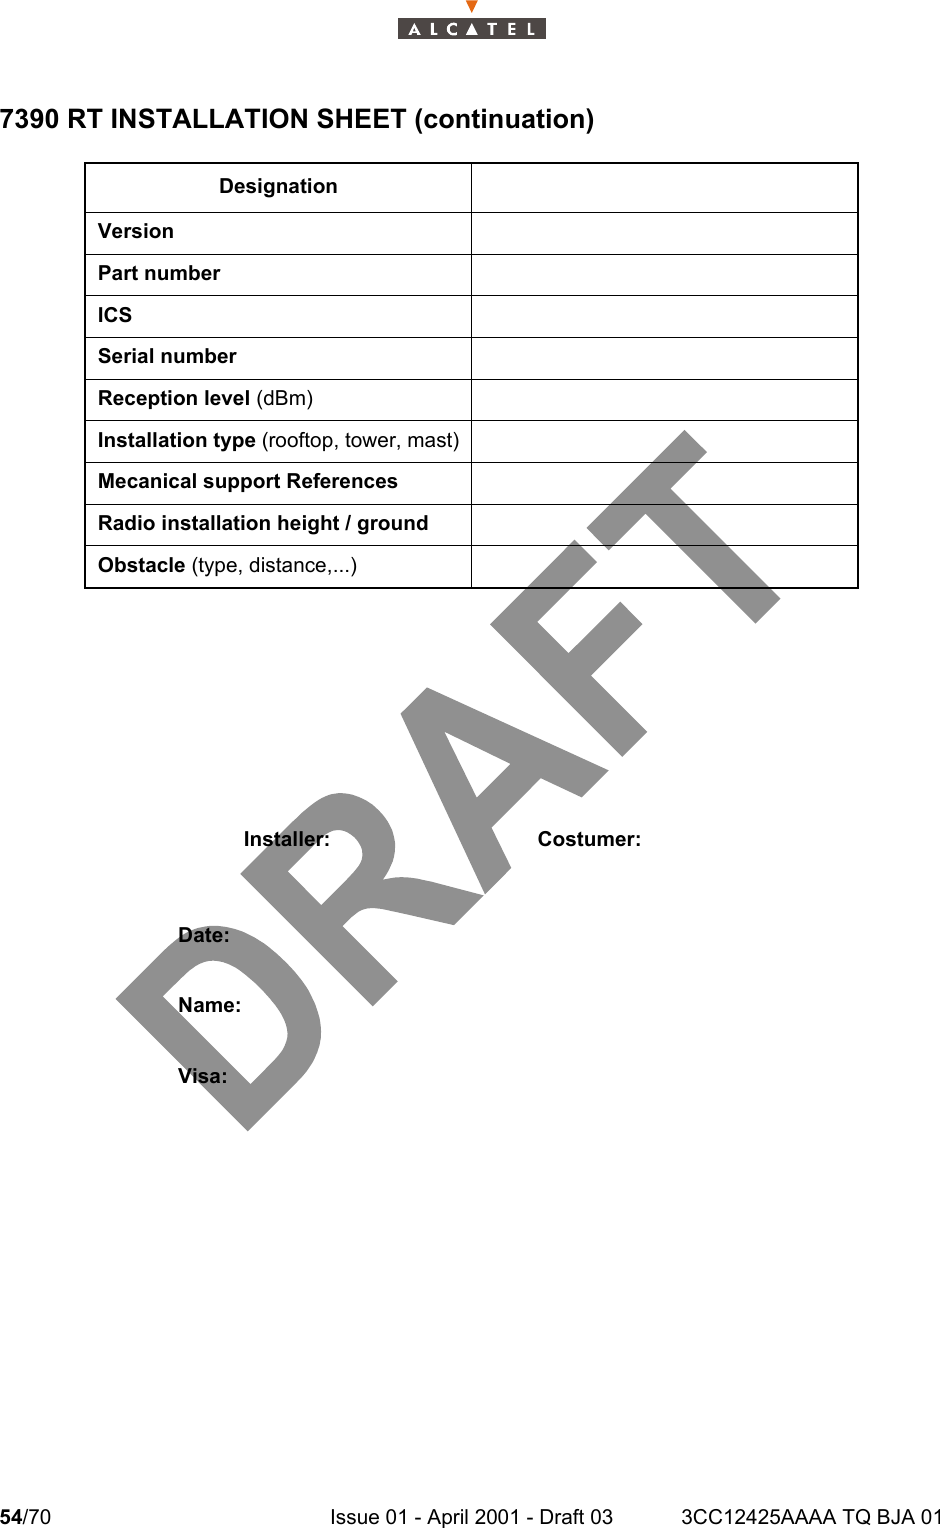 54/70 Issue 01 - April 2001 - Draft 03 3CC12425AAAA TQ BJA 01587390 RT INSTALLATION SHEET (continuation)DesignationVersionPart numberICSSerial numberReception level (dBm)Installation type (rooftop, tower, mast)Mecanical support ReferencesRadio installation height / groundObstacle (type, distance,...)Installer: Costumer:Date:Name:Visa: